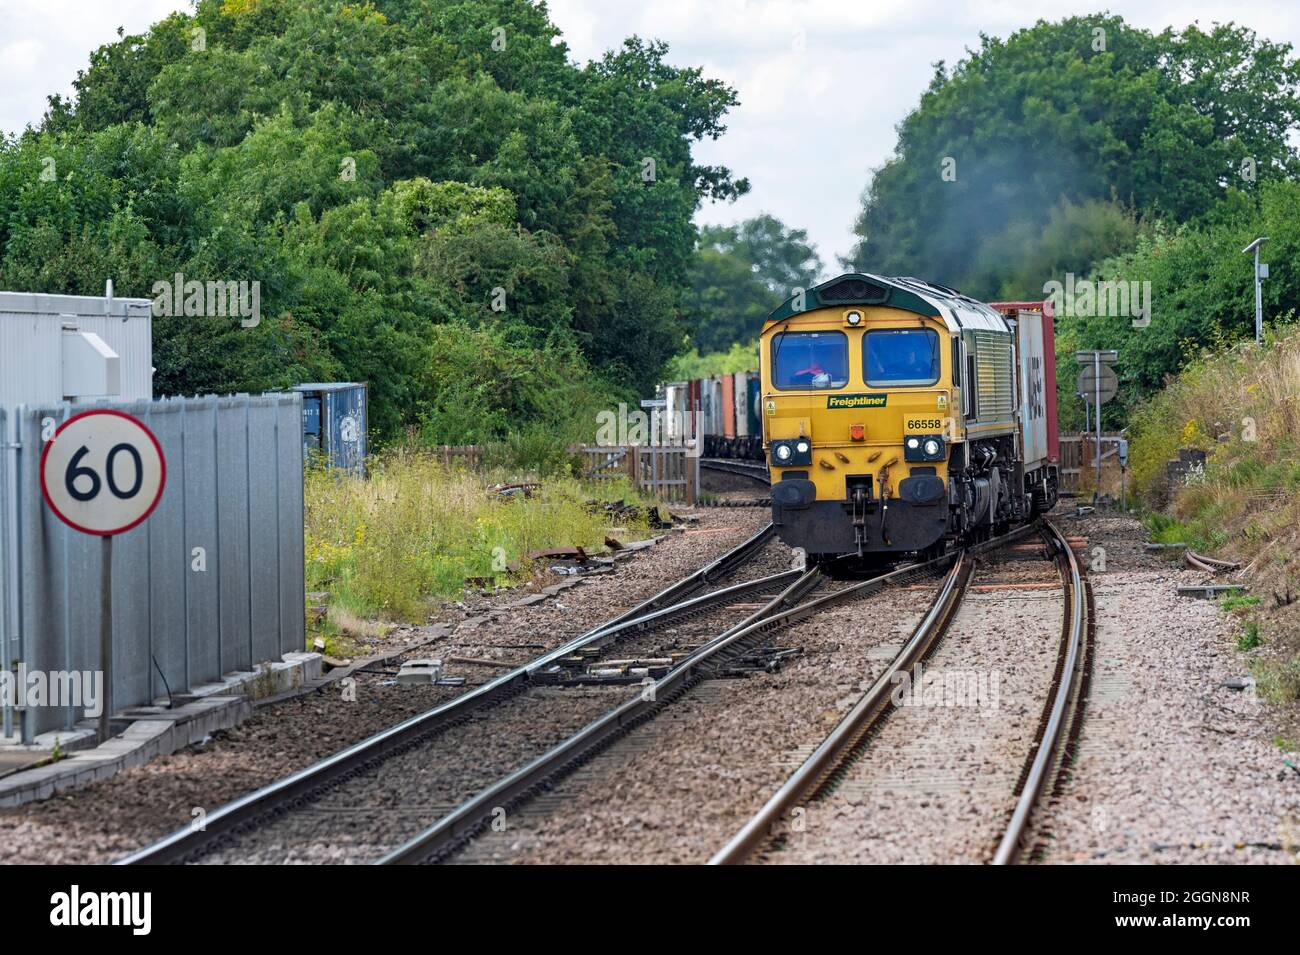 Freightliner freight train on the Ipswich to Felixstowe container port line, Westerfield, Suffolk, UK. Stock Photo